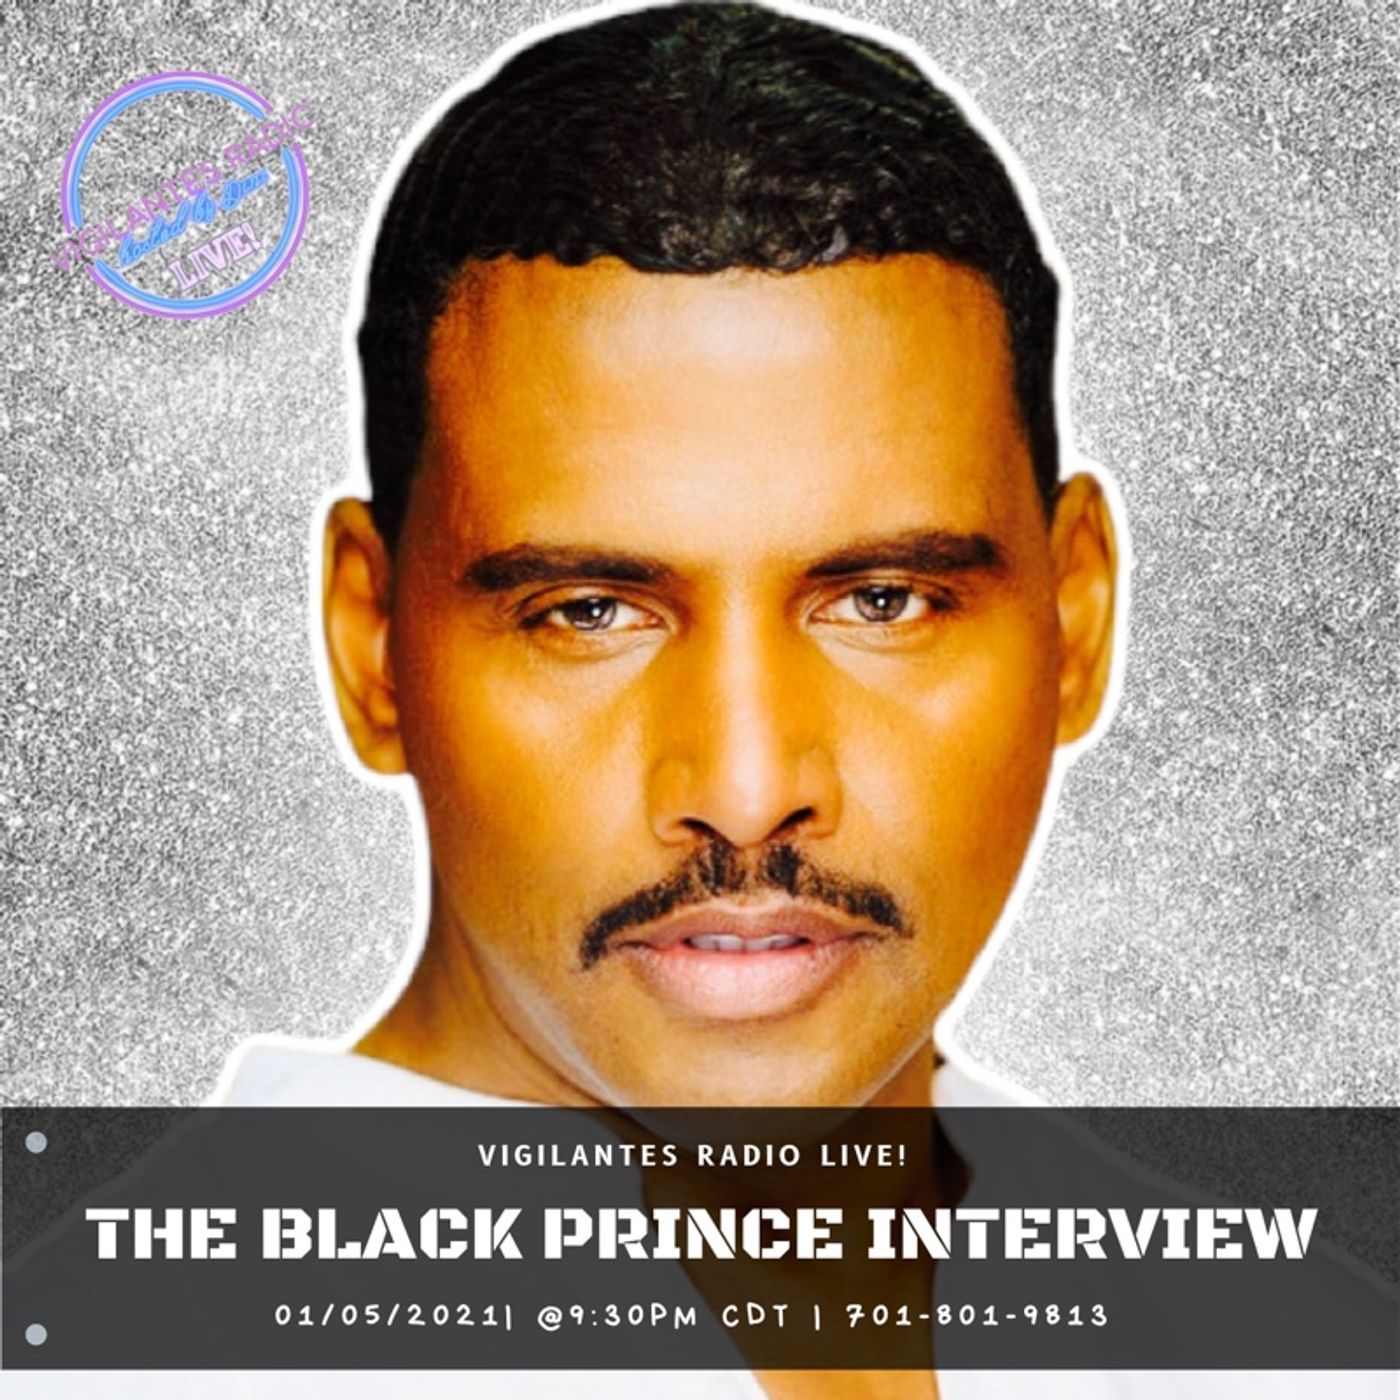 The Black Prince Interview. Image